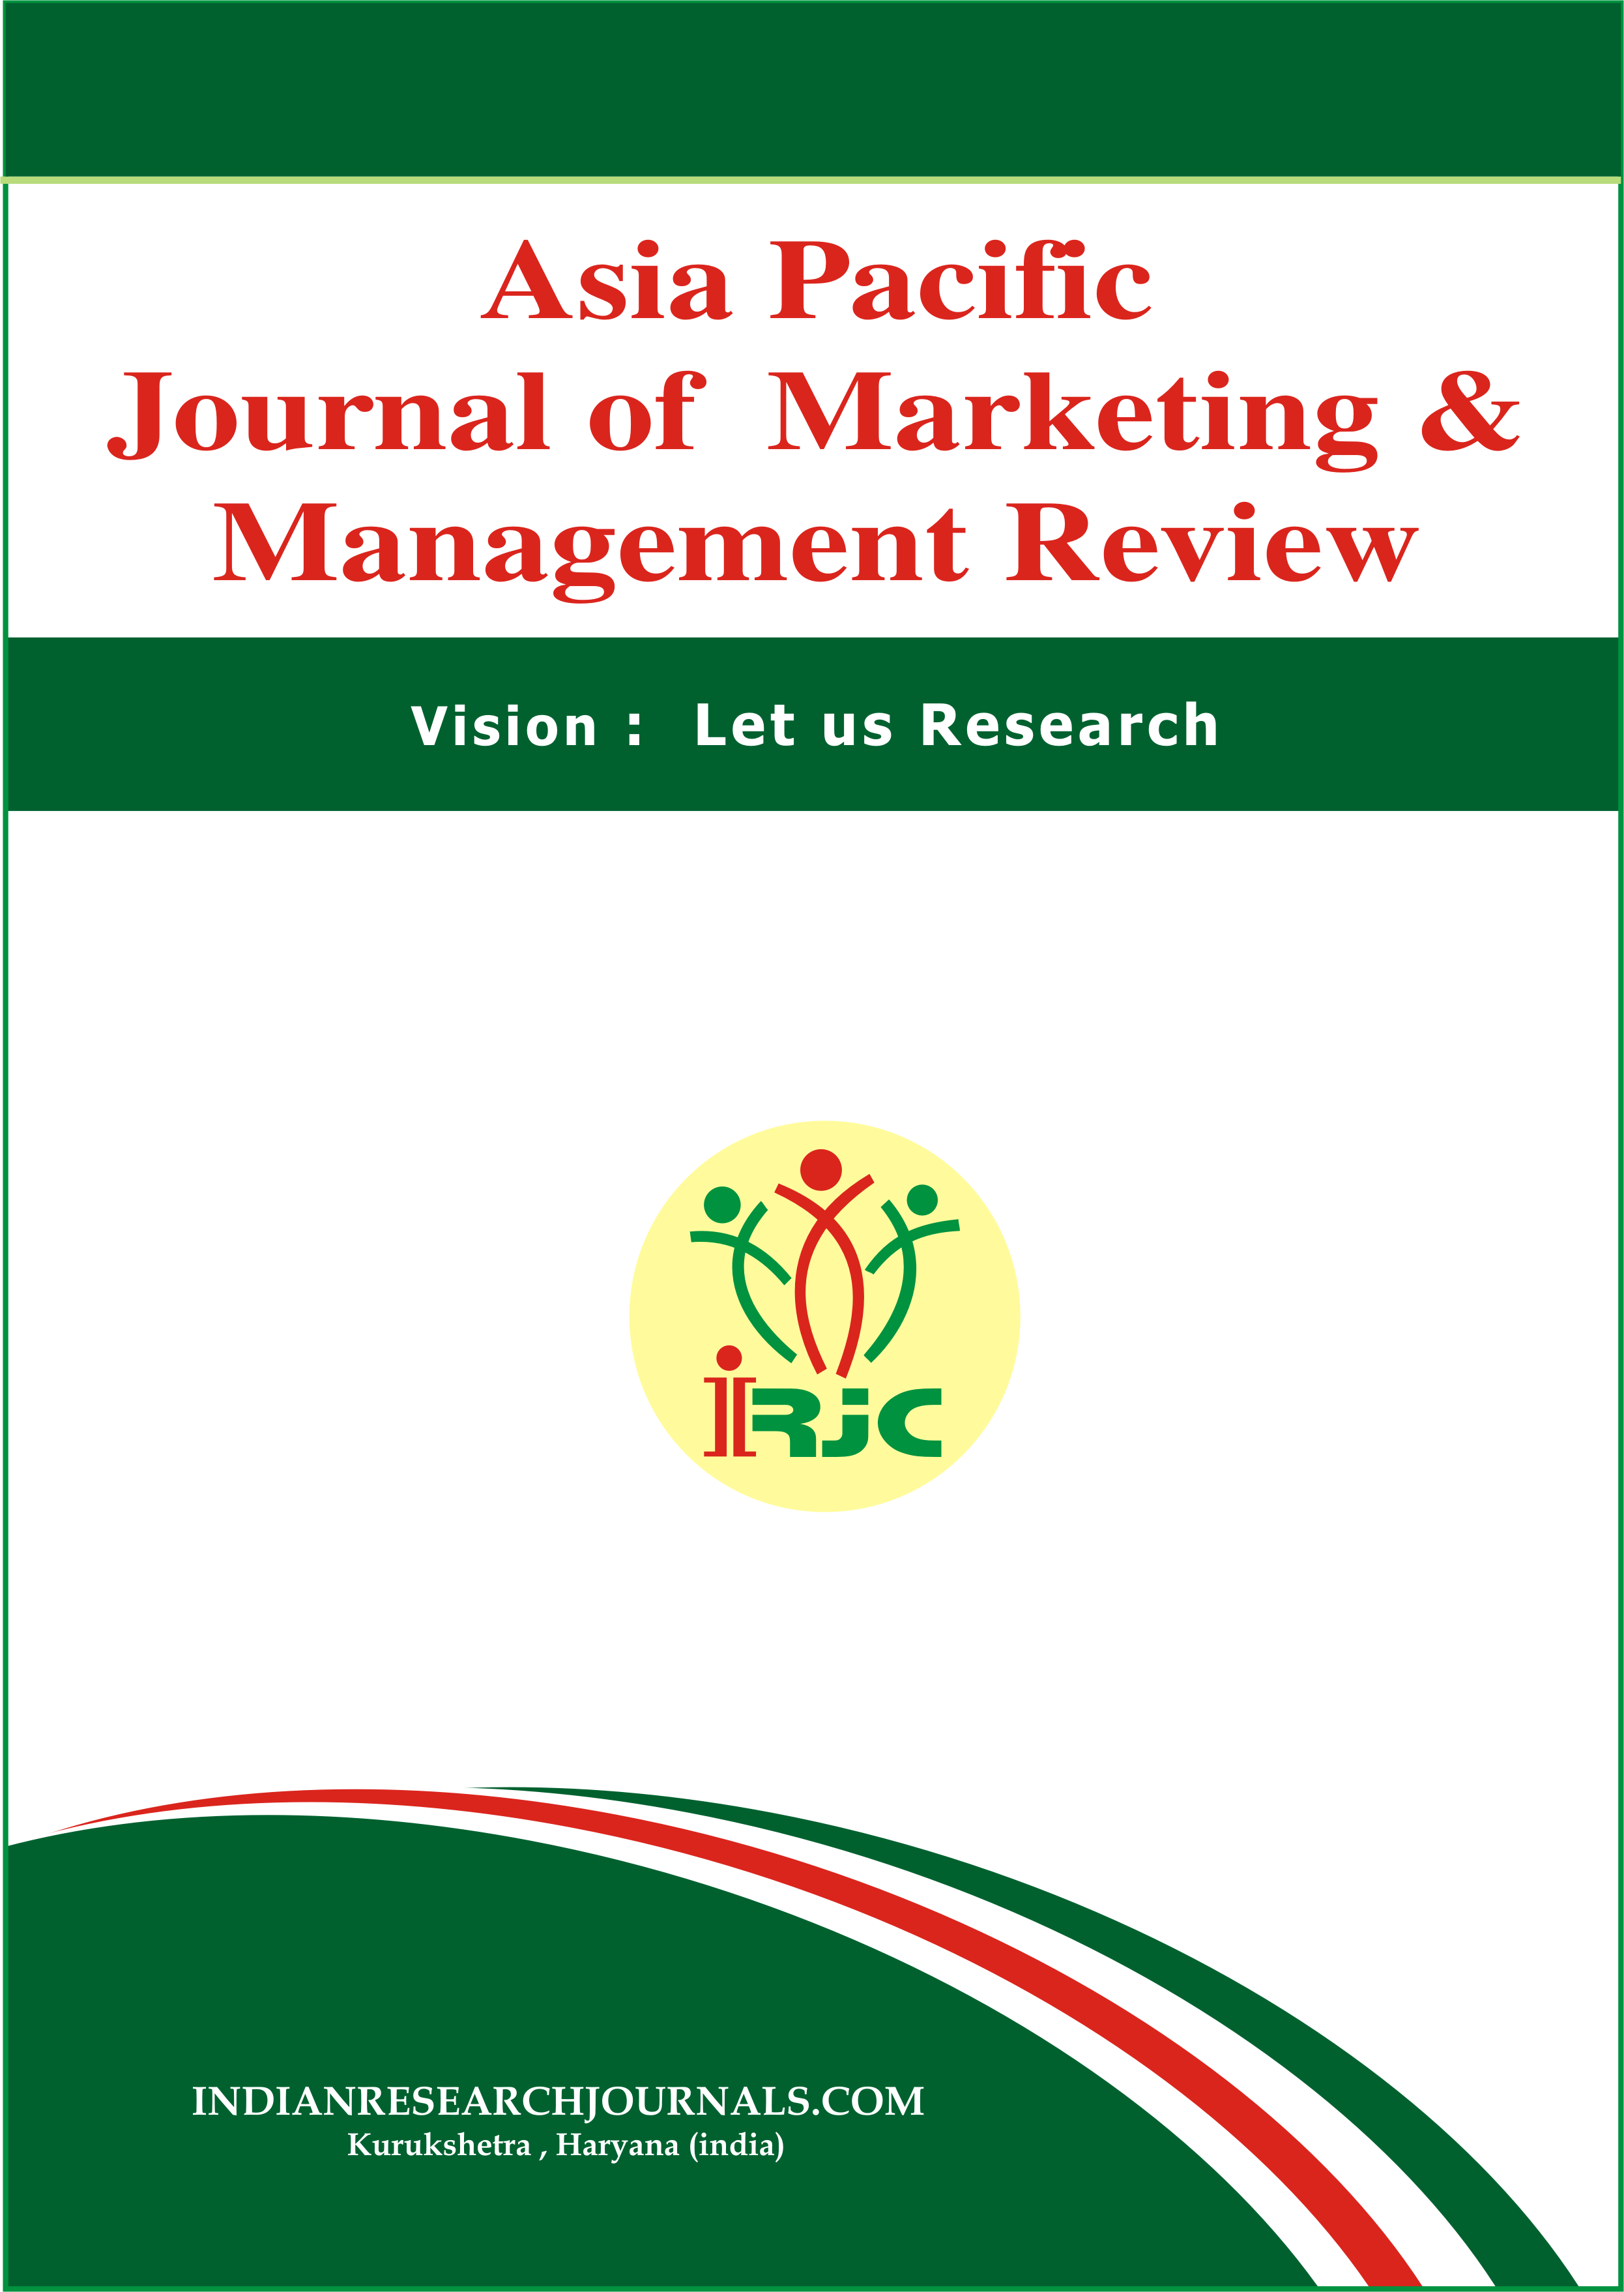 					View Vol. 11 No. 09 (2022): ASIA PACIFIC JOURNAL OF MARKETING & MANAGEMENT REVIEW
				